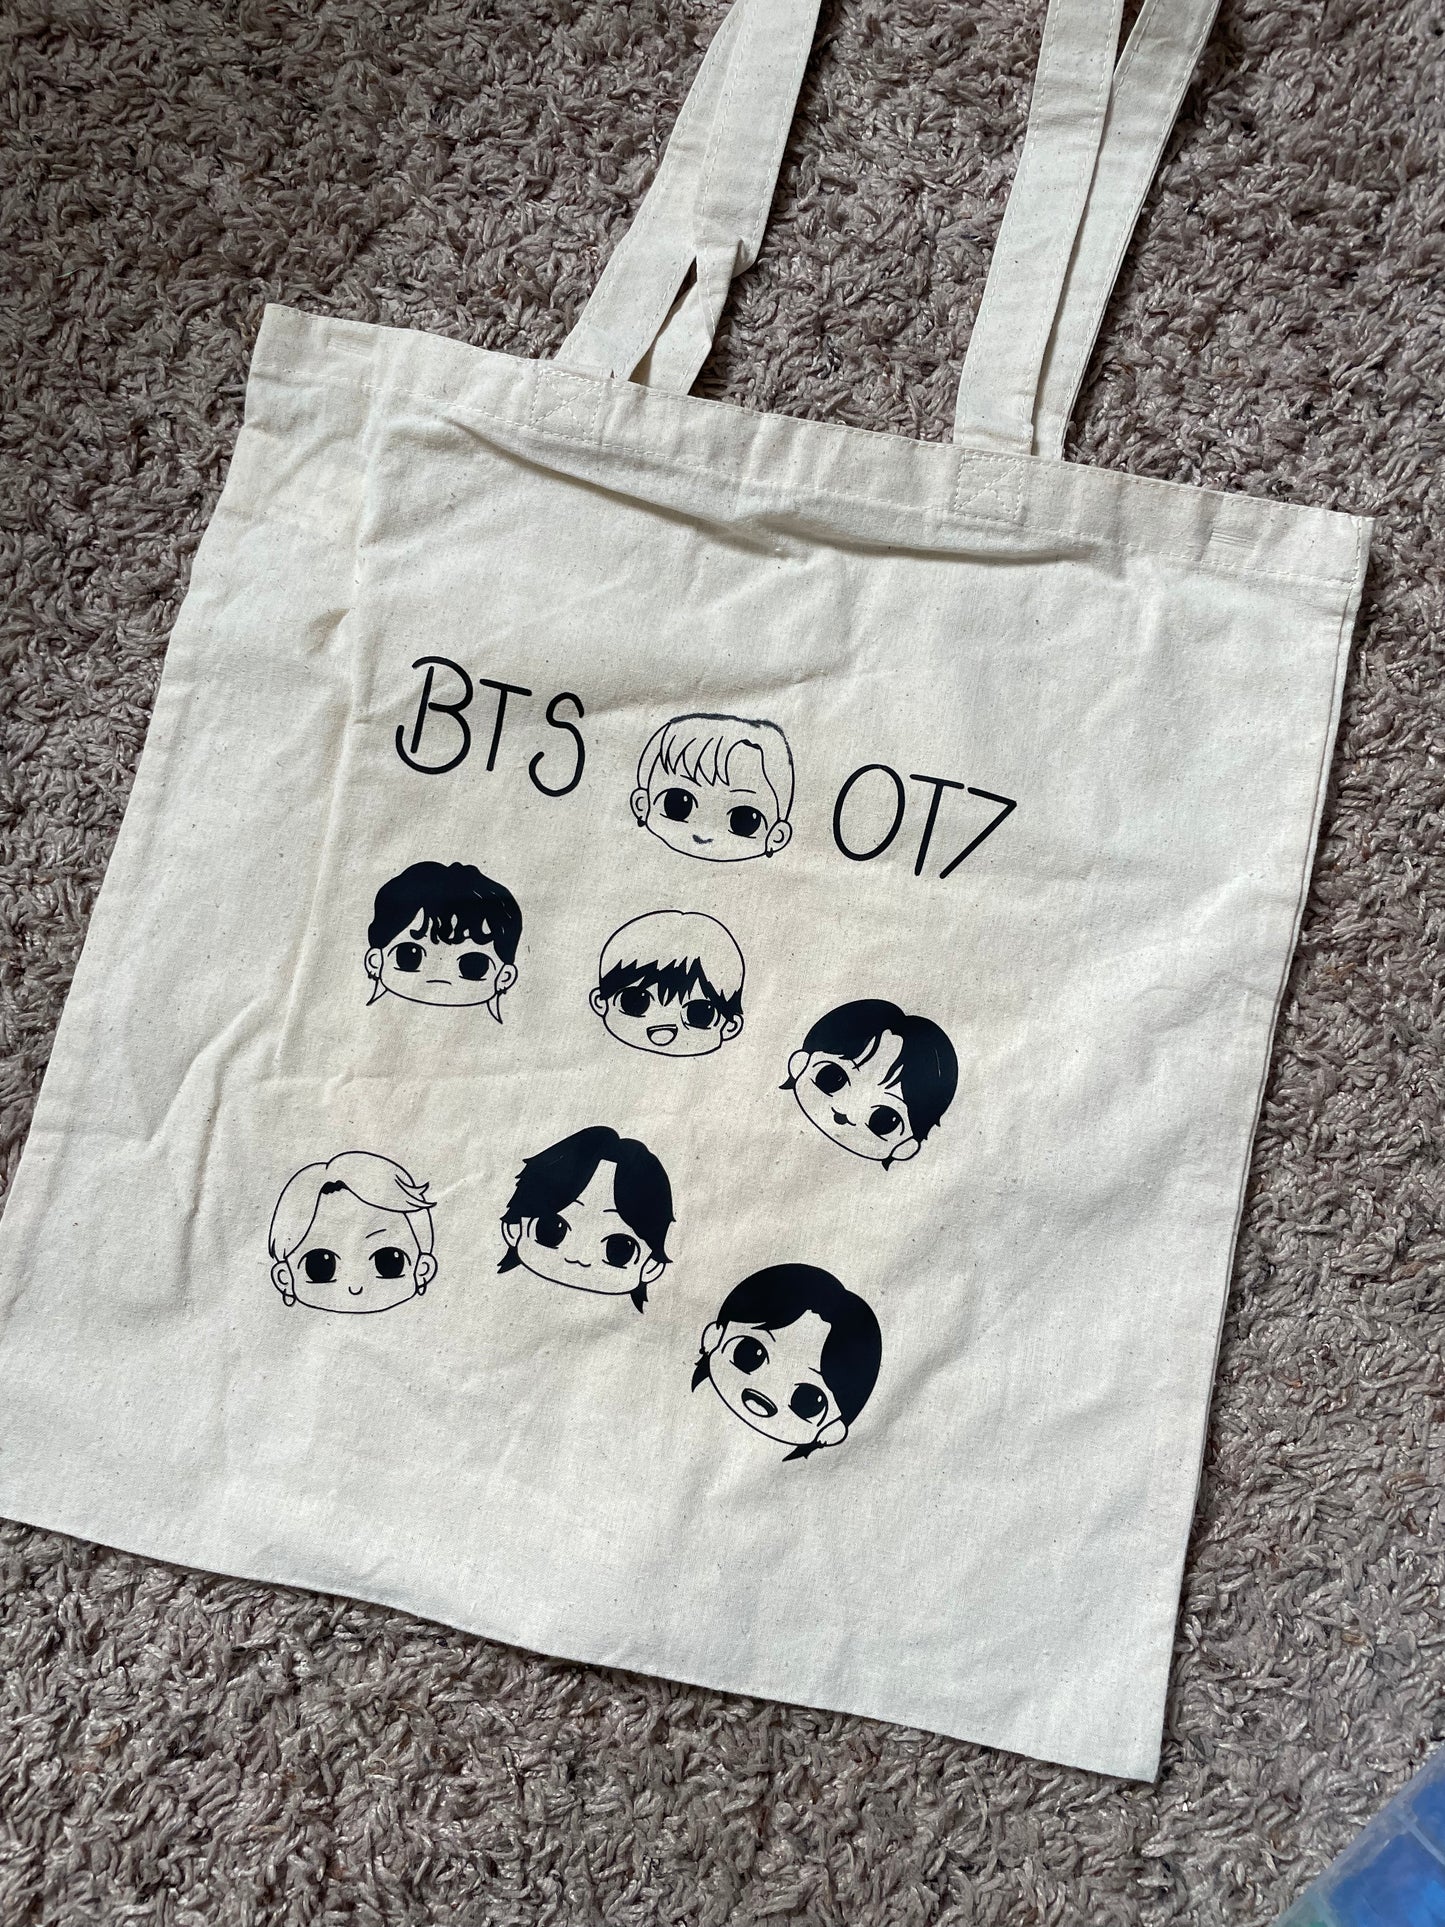 Bts butter ot7 tote bags